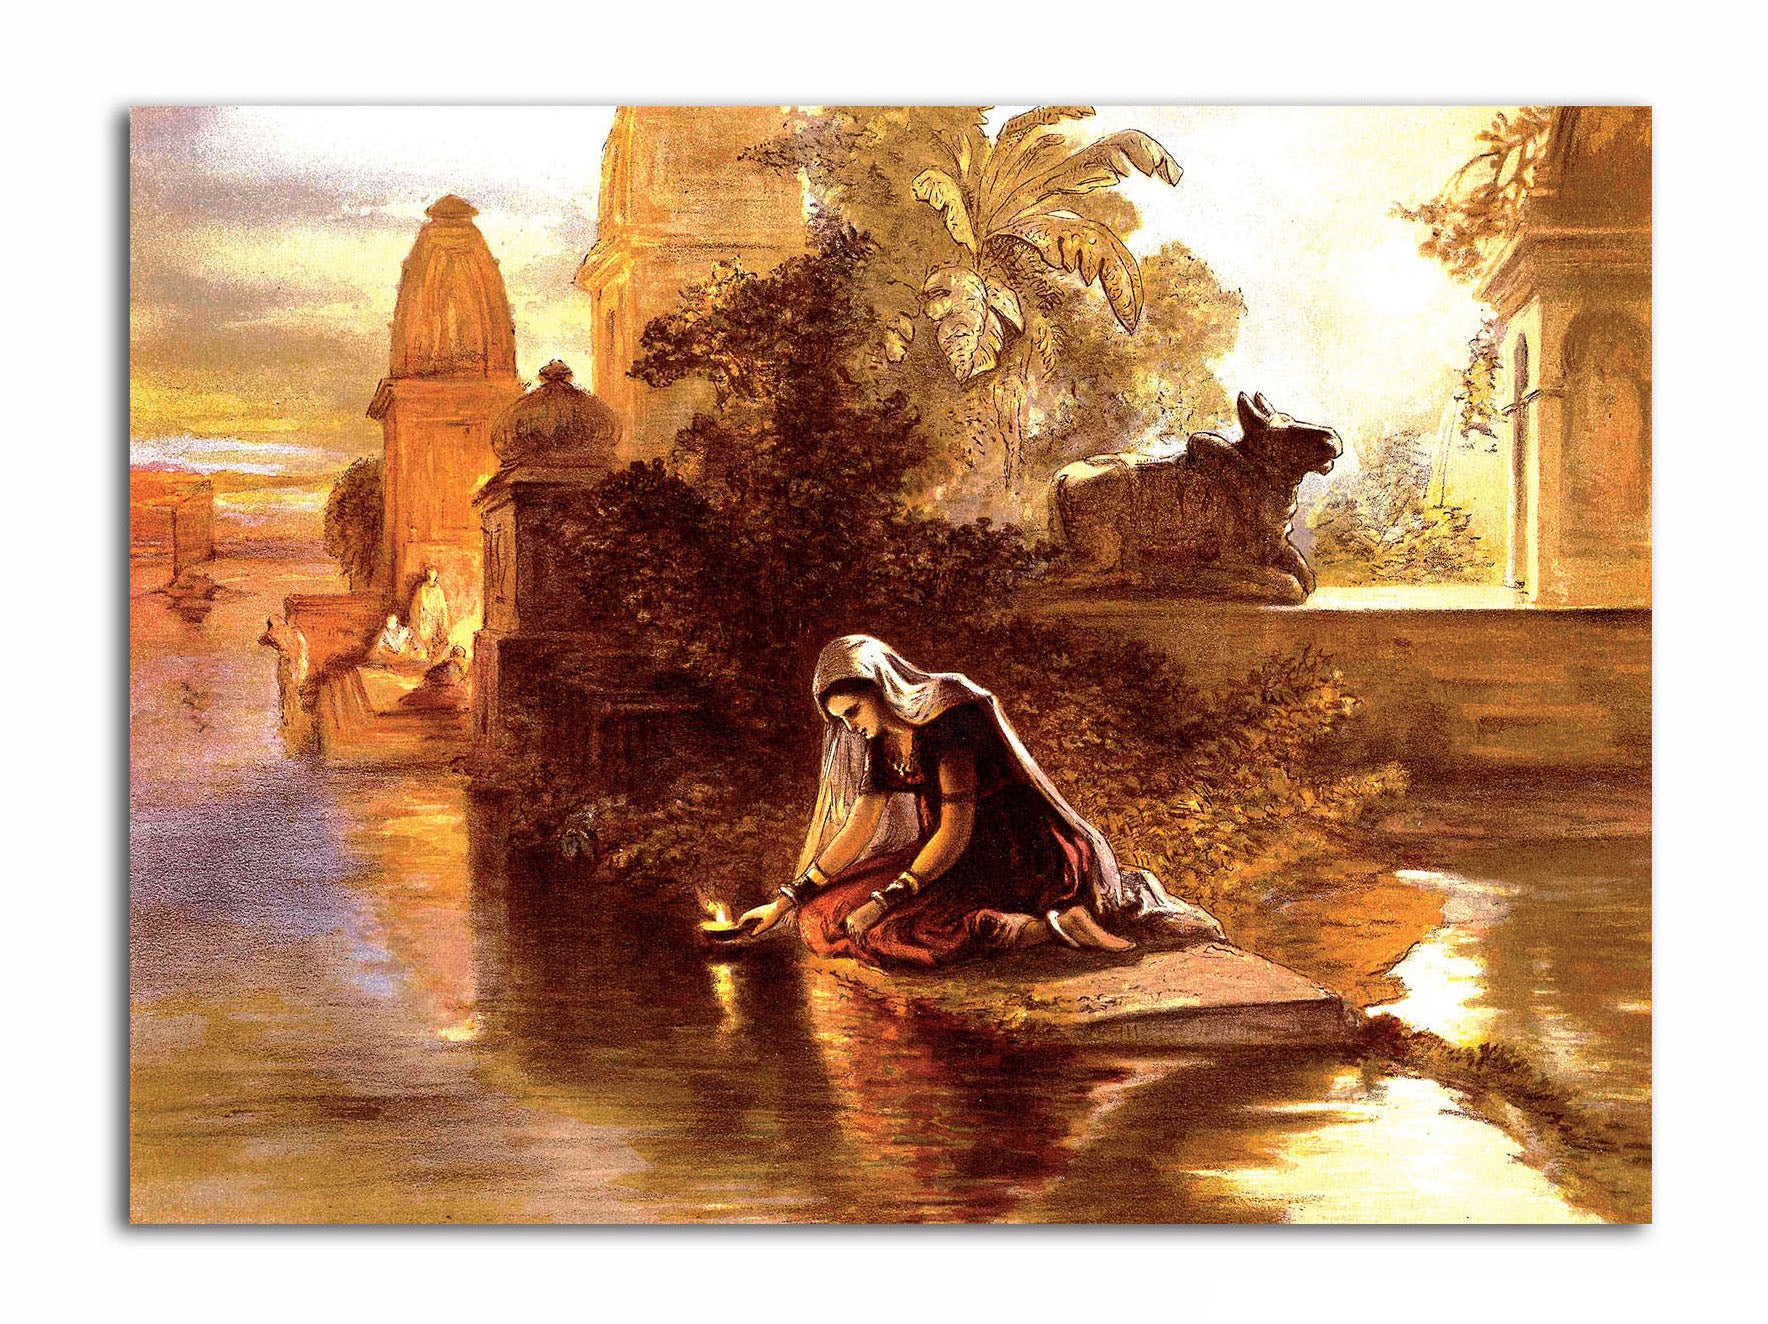 A Girl Praying on a River Side - Unframed Canvas Painting